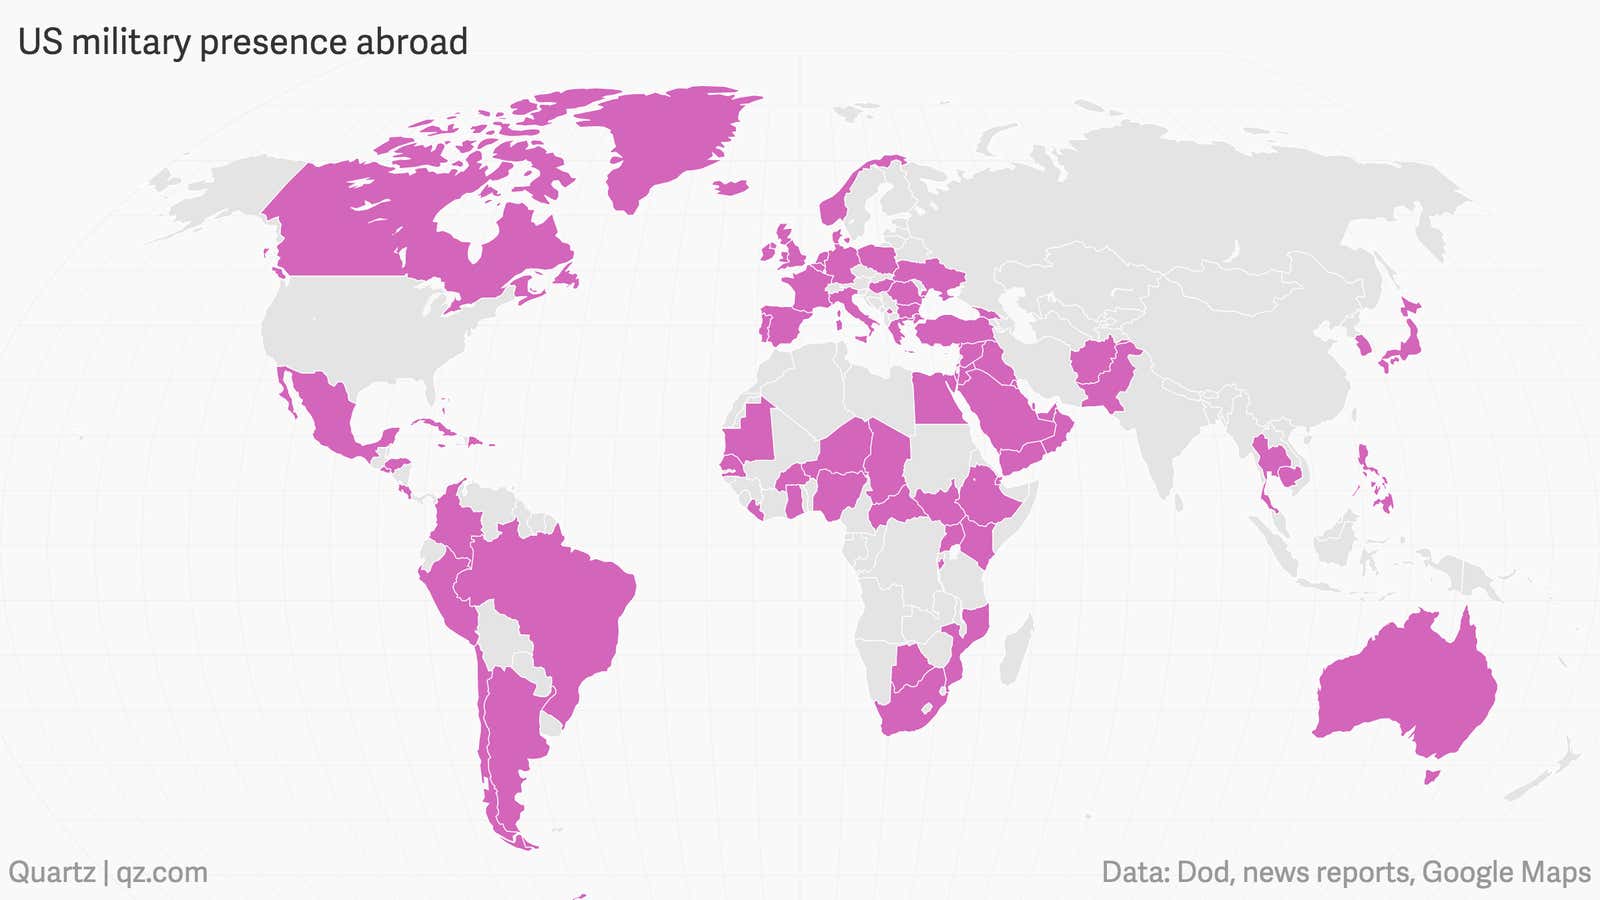 These are all the countries where the US has a military presence